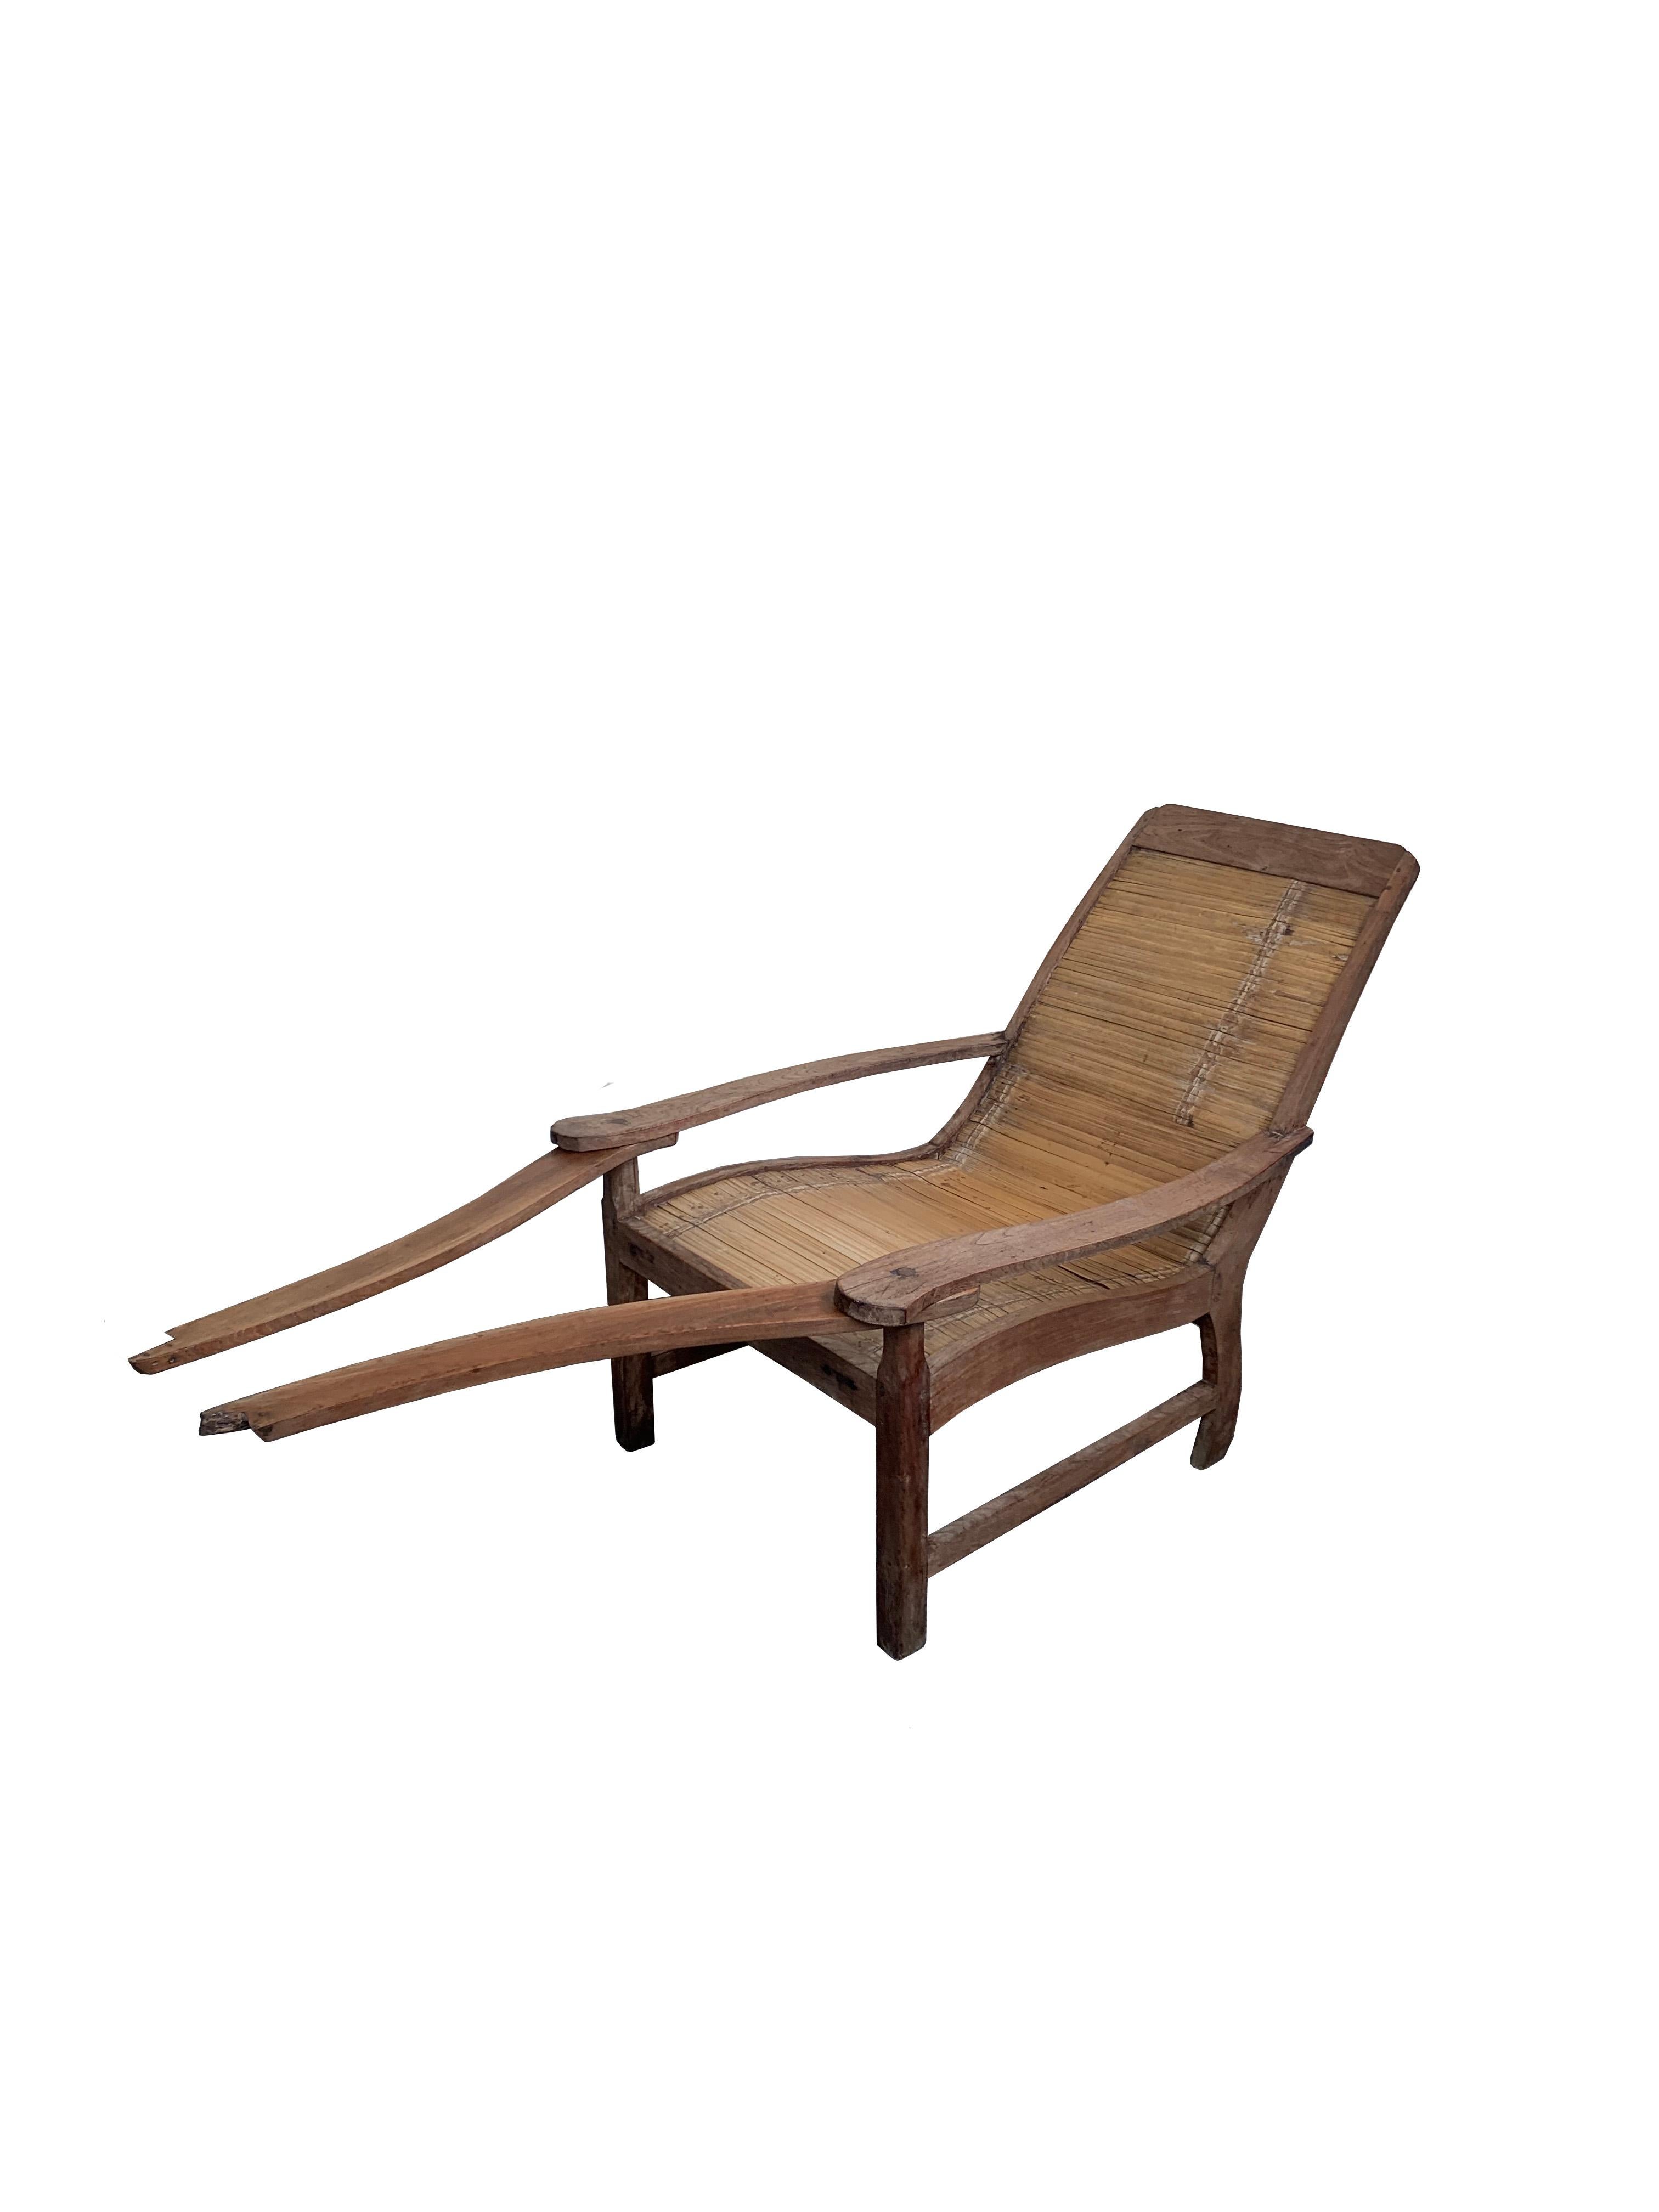 An elegant solid teak wood and bamboo seat plantation chair from the island of Java, Indonesia. This chair features swing-out leg rests that can be kept tucked under the arm rests or fully extended. 

